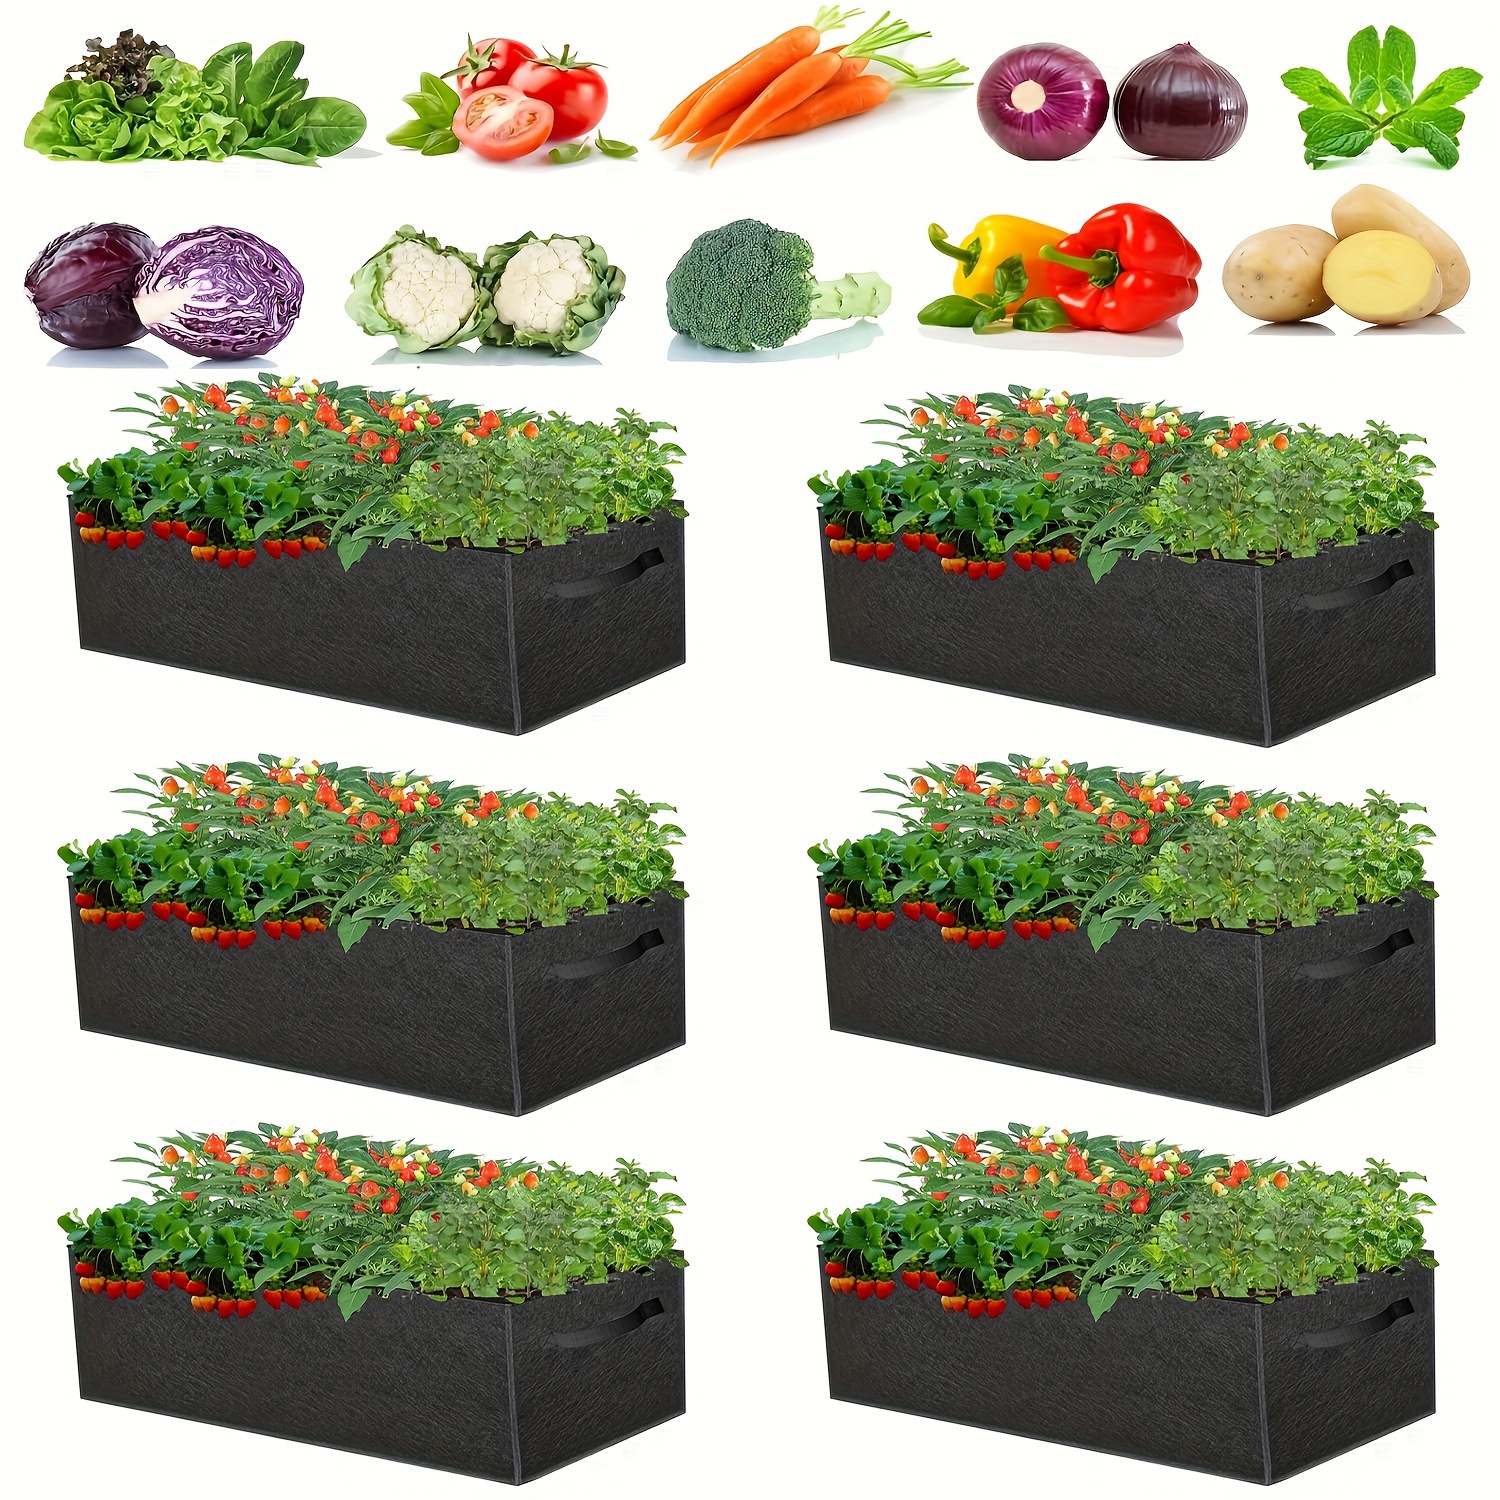 

6 Packs, 9.5 Gallon 7.9 Gallon Grow Bags, 300g Thickened Nonwoven Fabric Garden Bed, 30l Square Flower Planter Pots Containers With Handles For Potato Onion Carrot Taro Radish, Fruit, Flowers